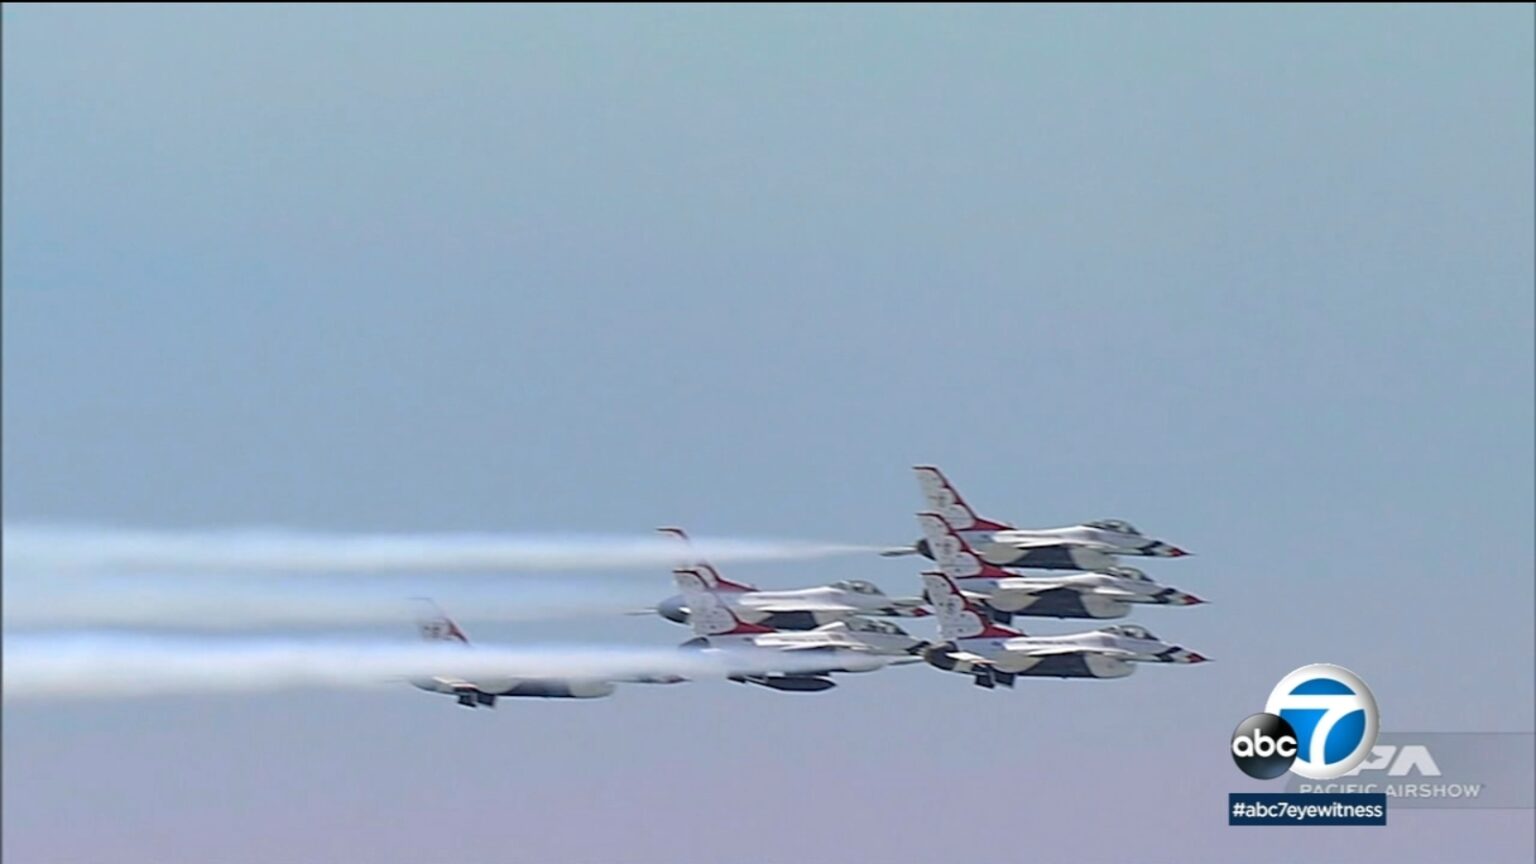 Pacific Airshow 2022 in Huntington Beach to be jampacked with family